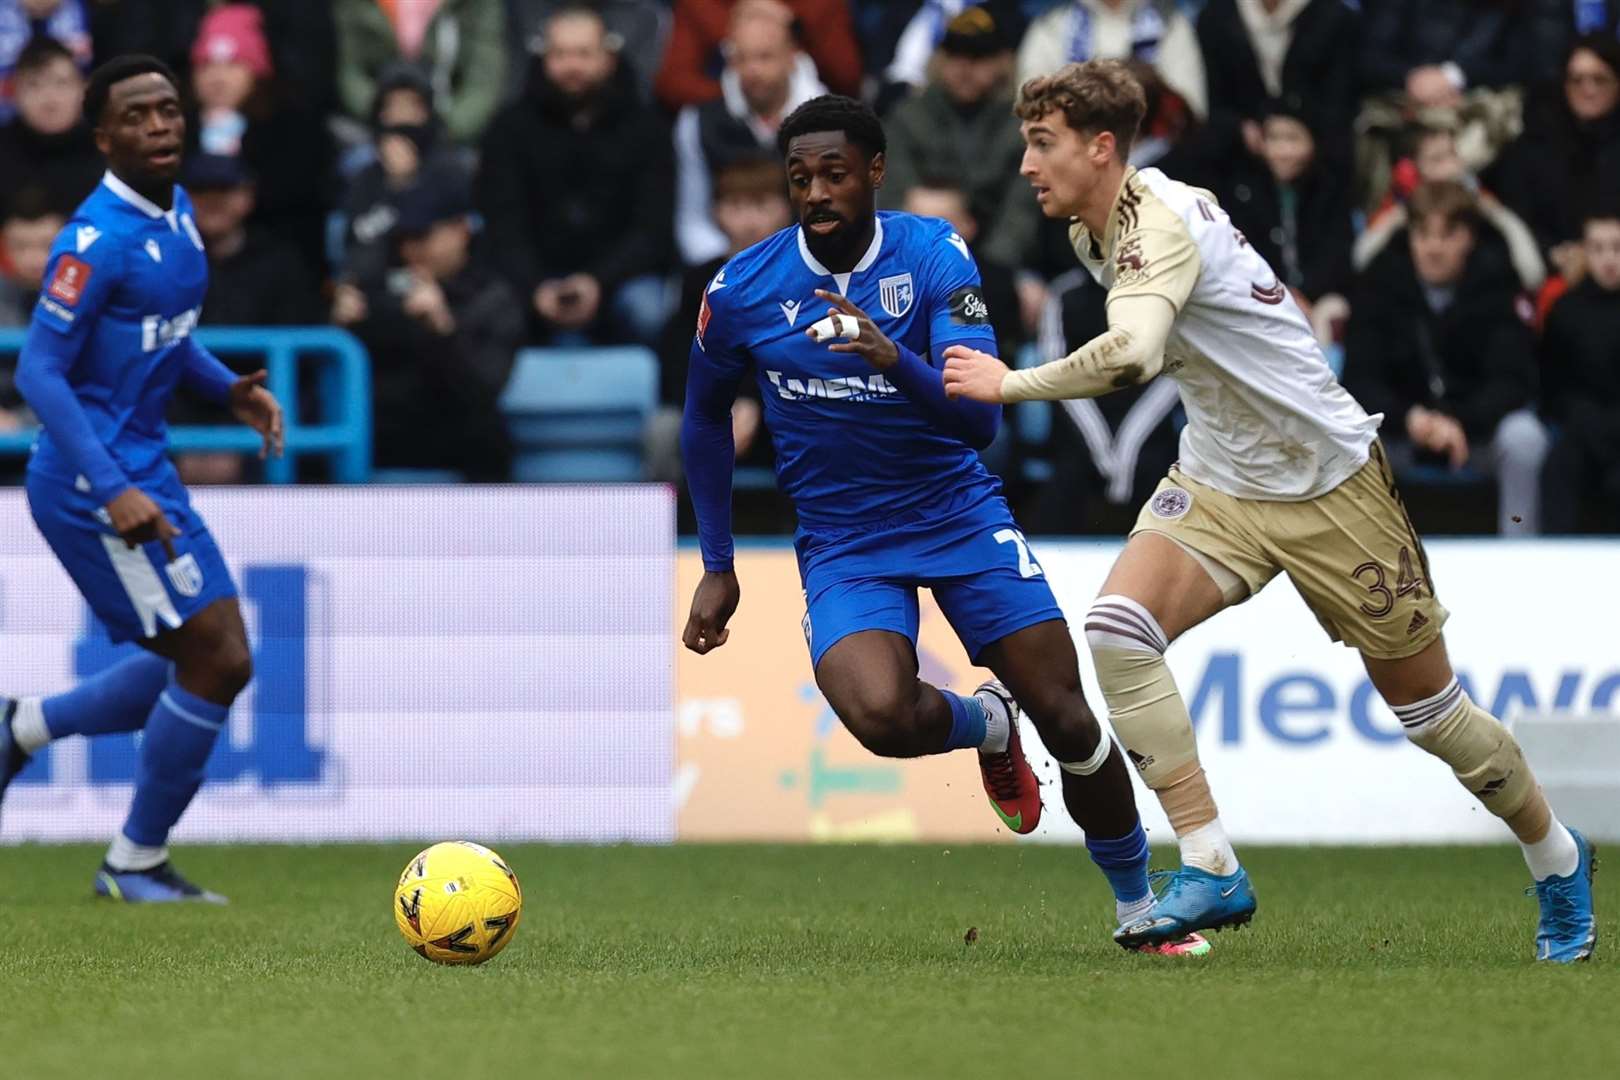 Winger Hakeeb Adelakun is on loan at Gillingham from League 1 side Lincoln City